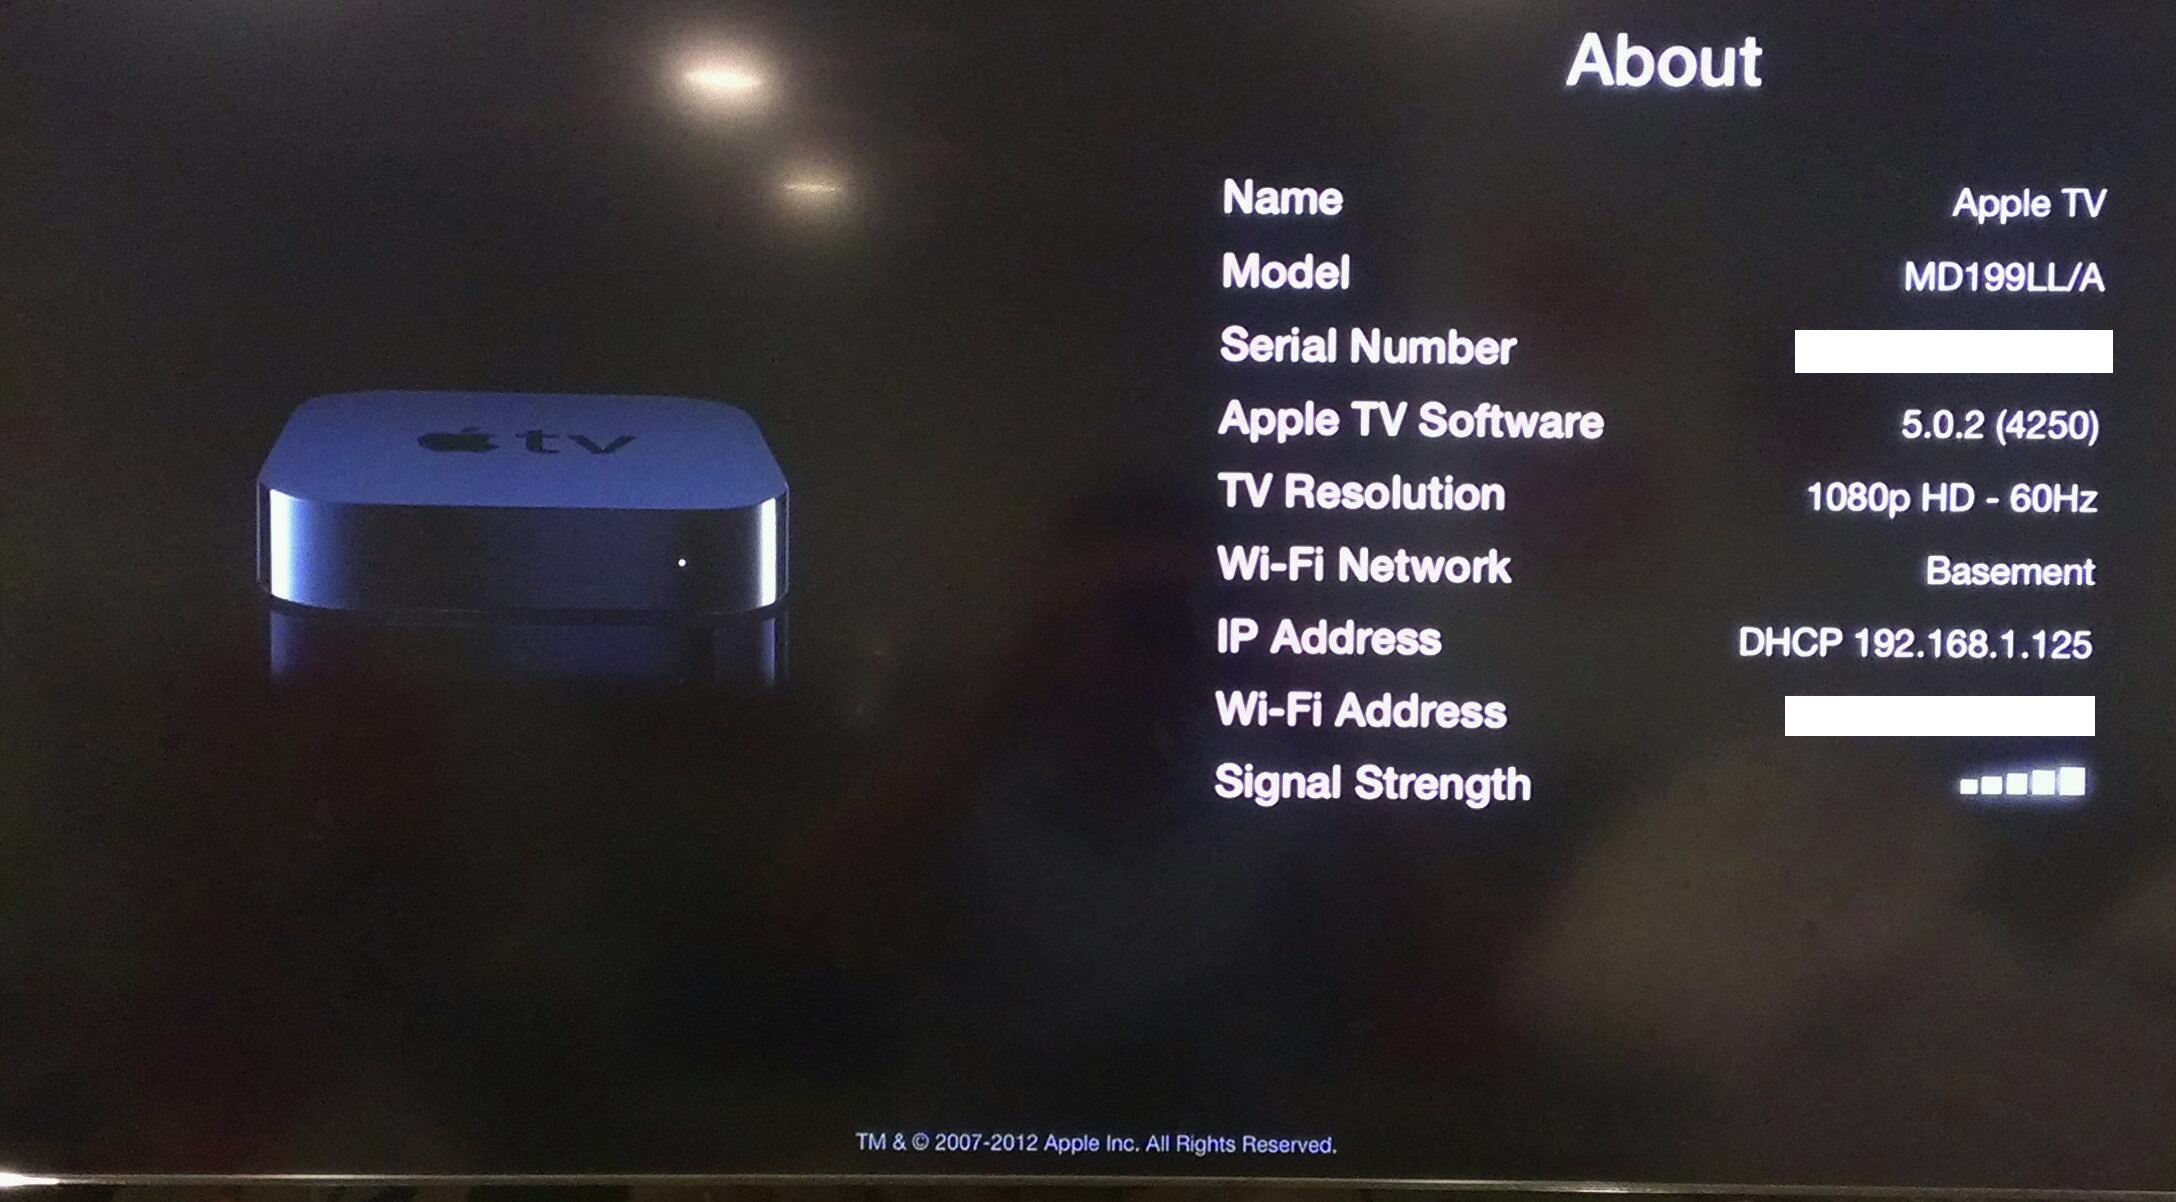 Apple TV Firmware updated to 5.0.2 (9B830) for 720p and 1080p models 9to5Mac